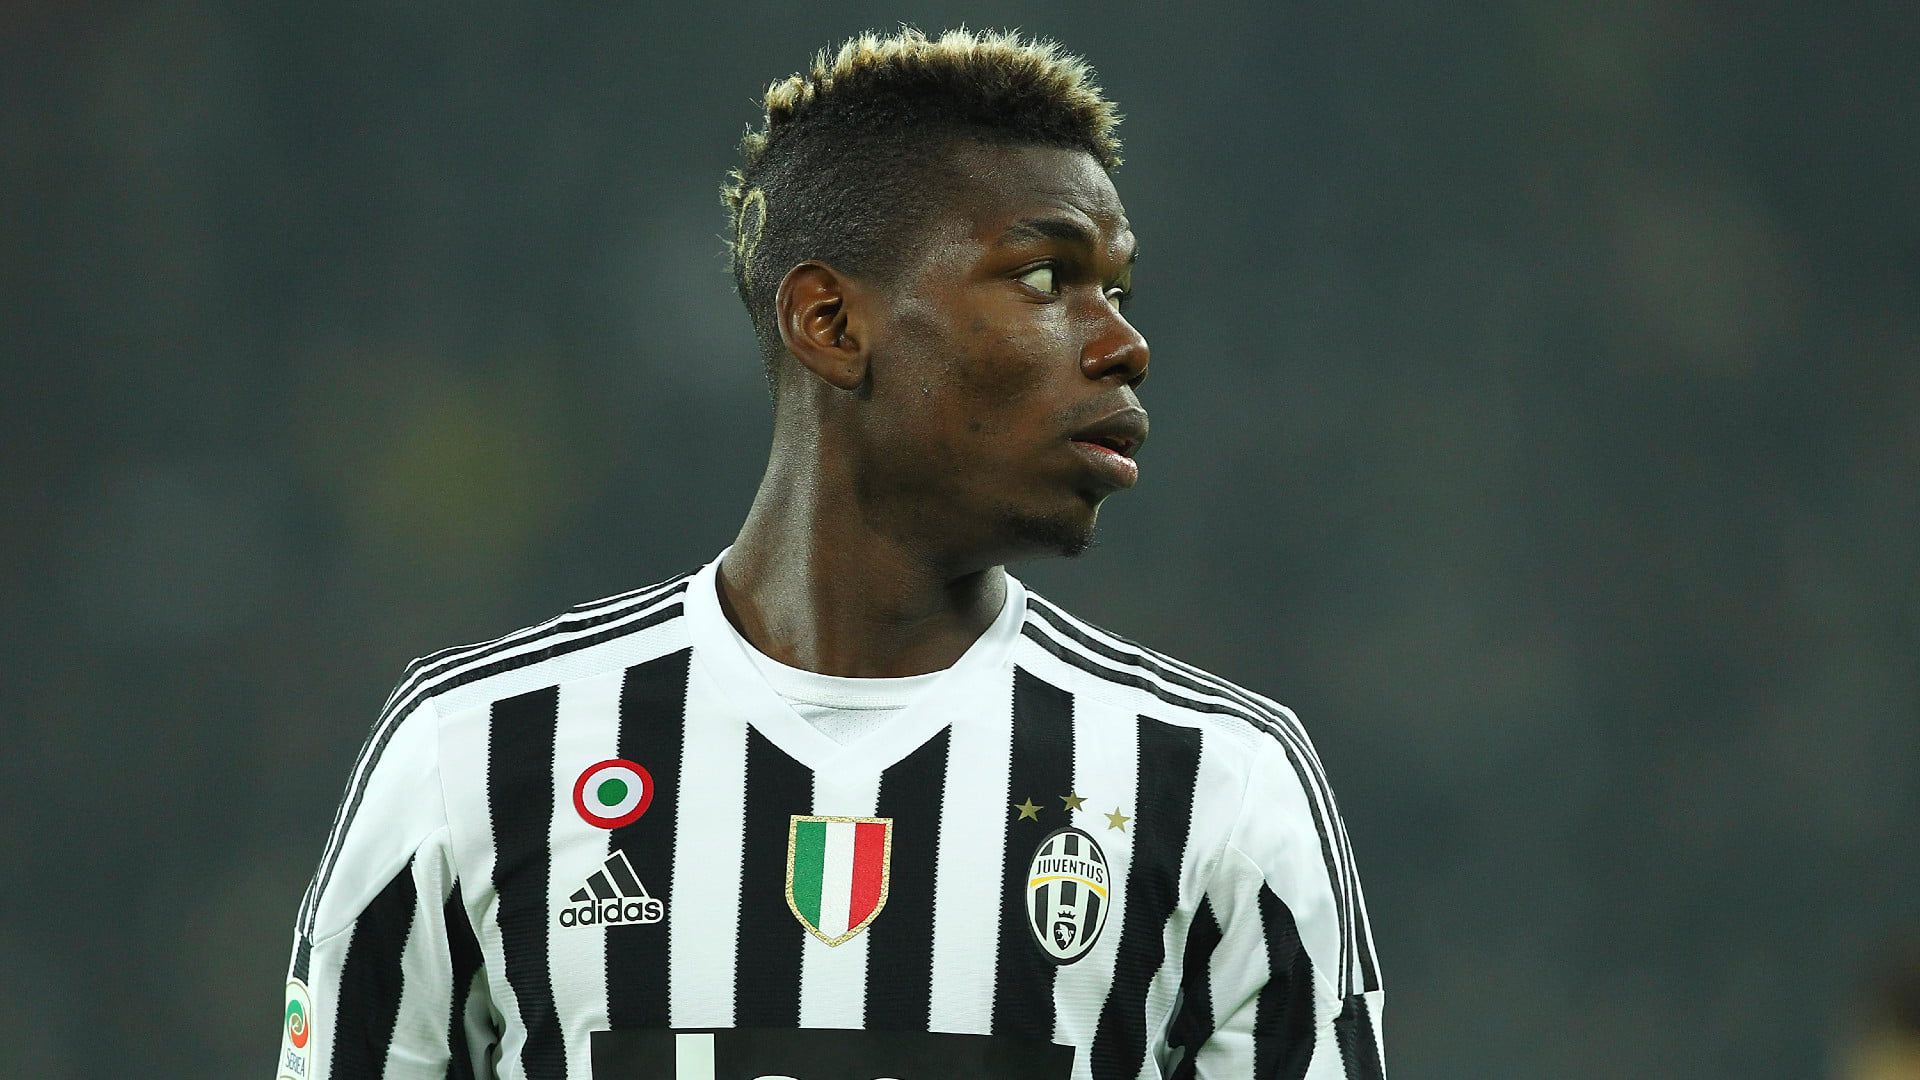 23 Extraordinary Facts About Paul Pogba - Facts.net